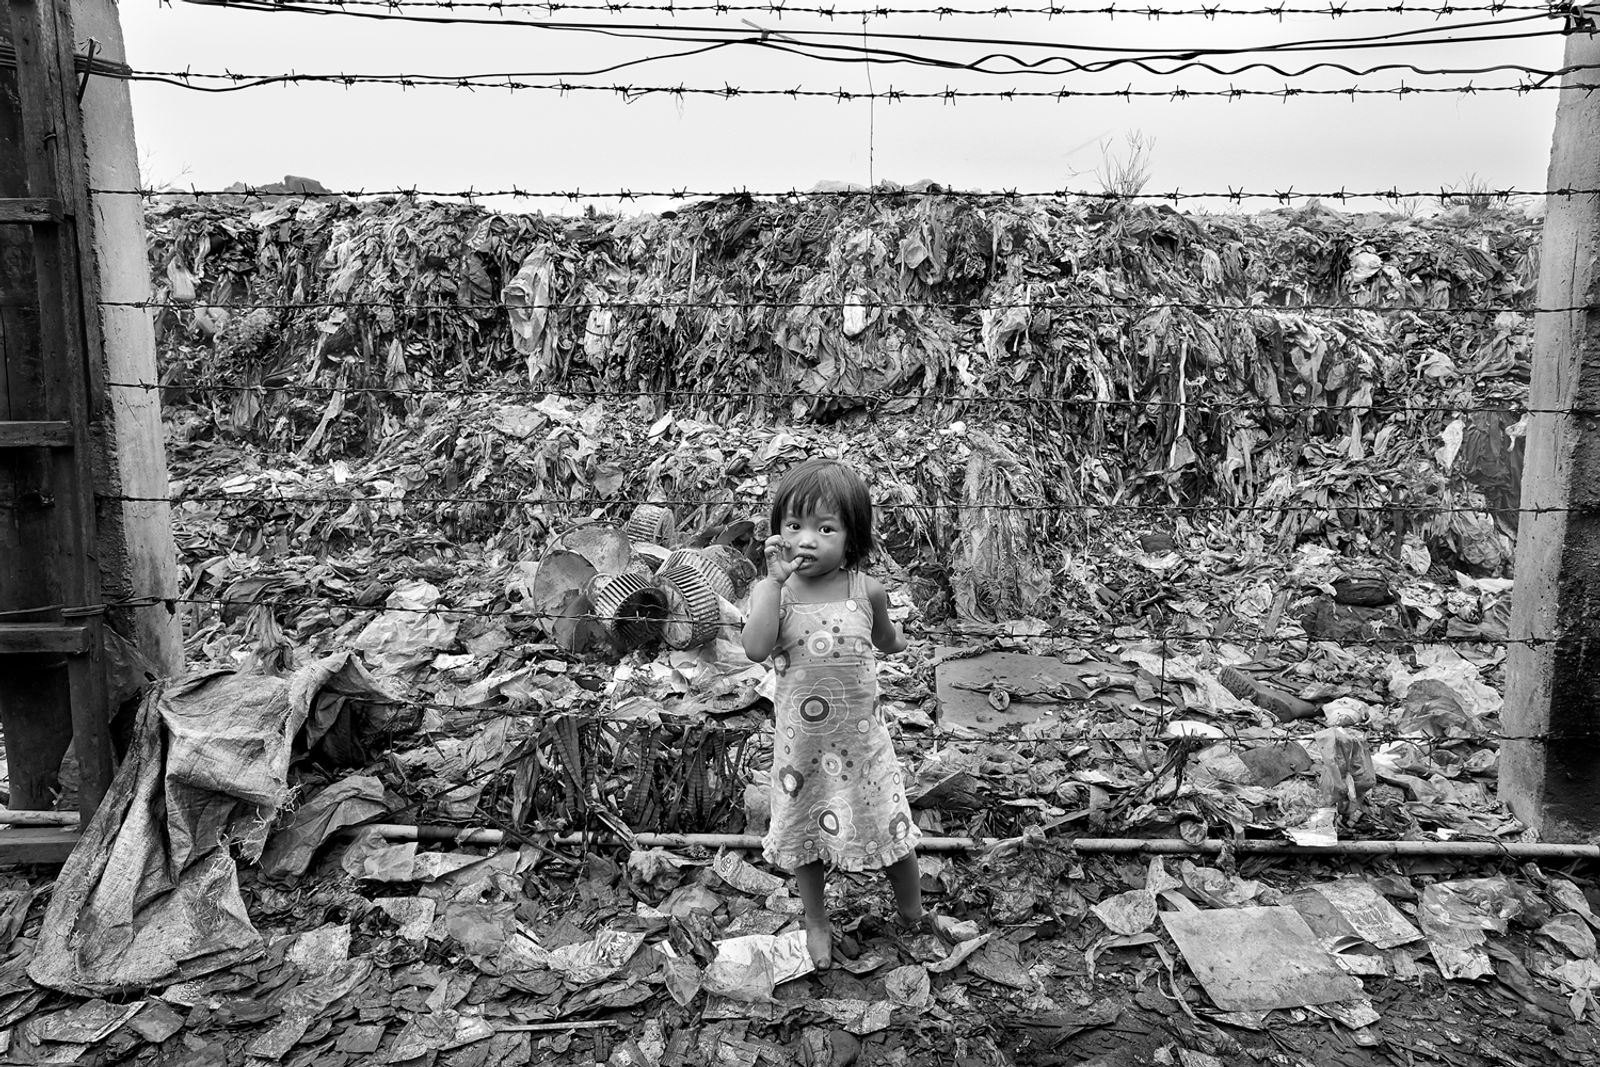 © Larry Louie - A 3 year old girl living and playing at the Smokey Mountain garbage dump in Manila.